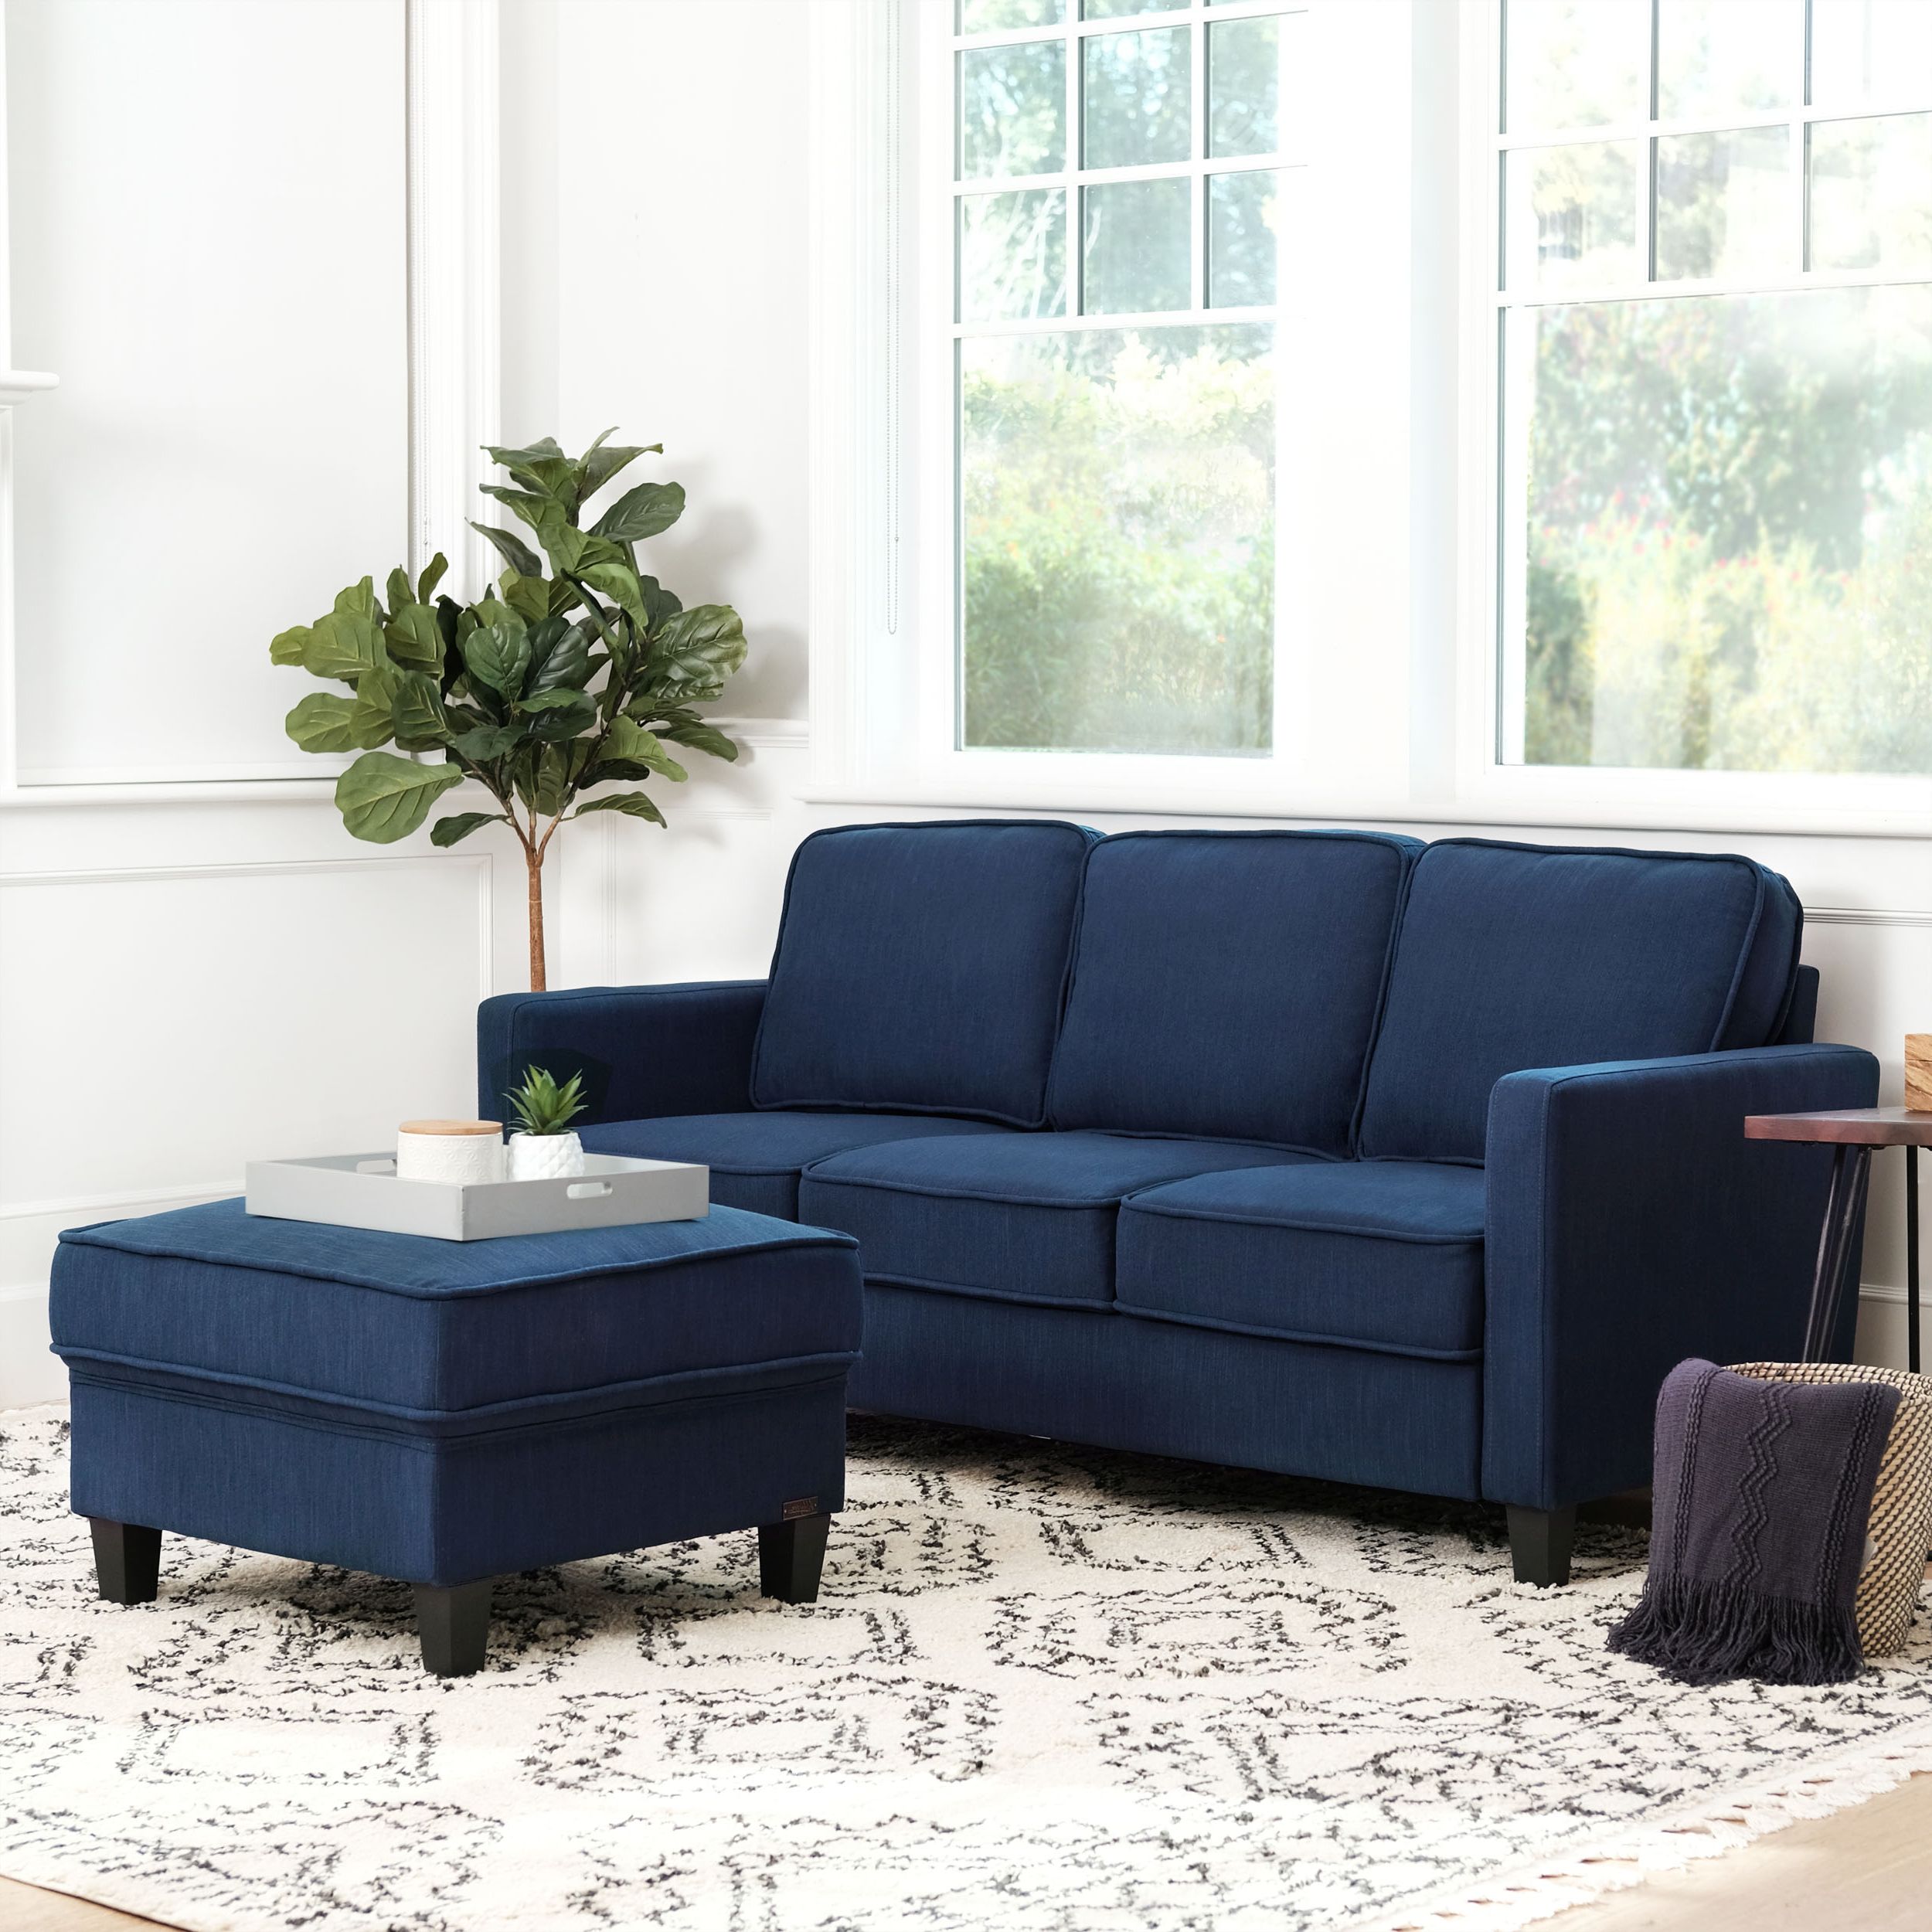 Most Current Devon & Claire Malabar Fabric Sofa And Ottoman Set, Navy Blue – Walmart In Dark Blue Fabric Banded Ottomans (View 7 of 10)